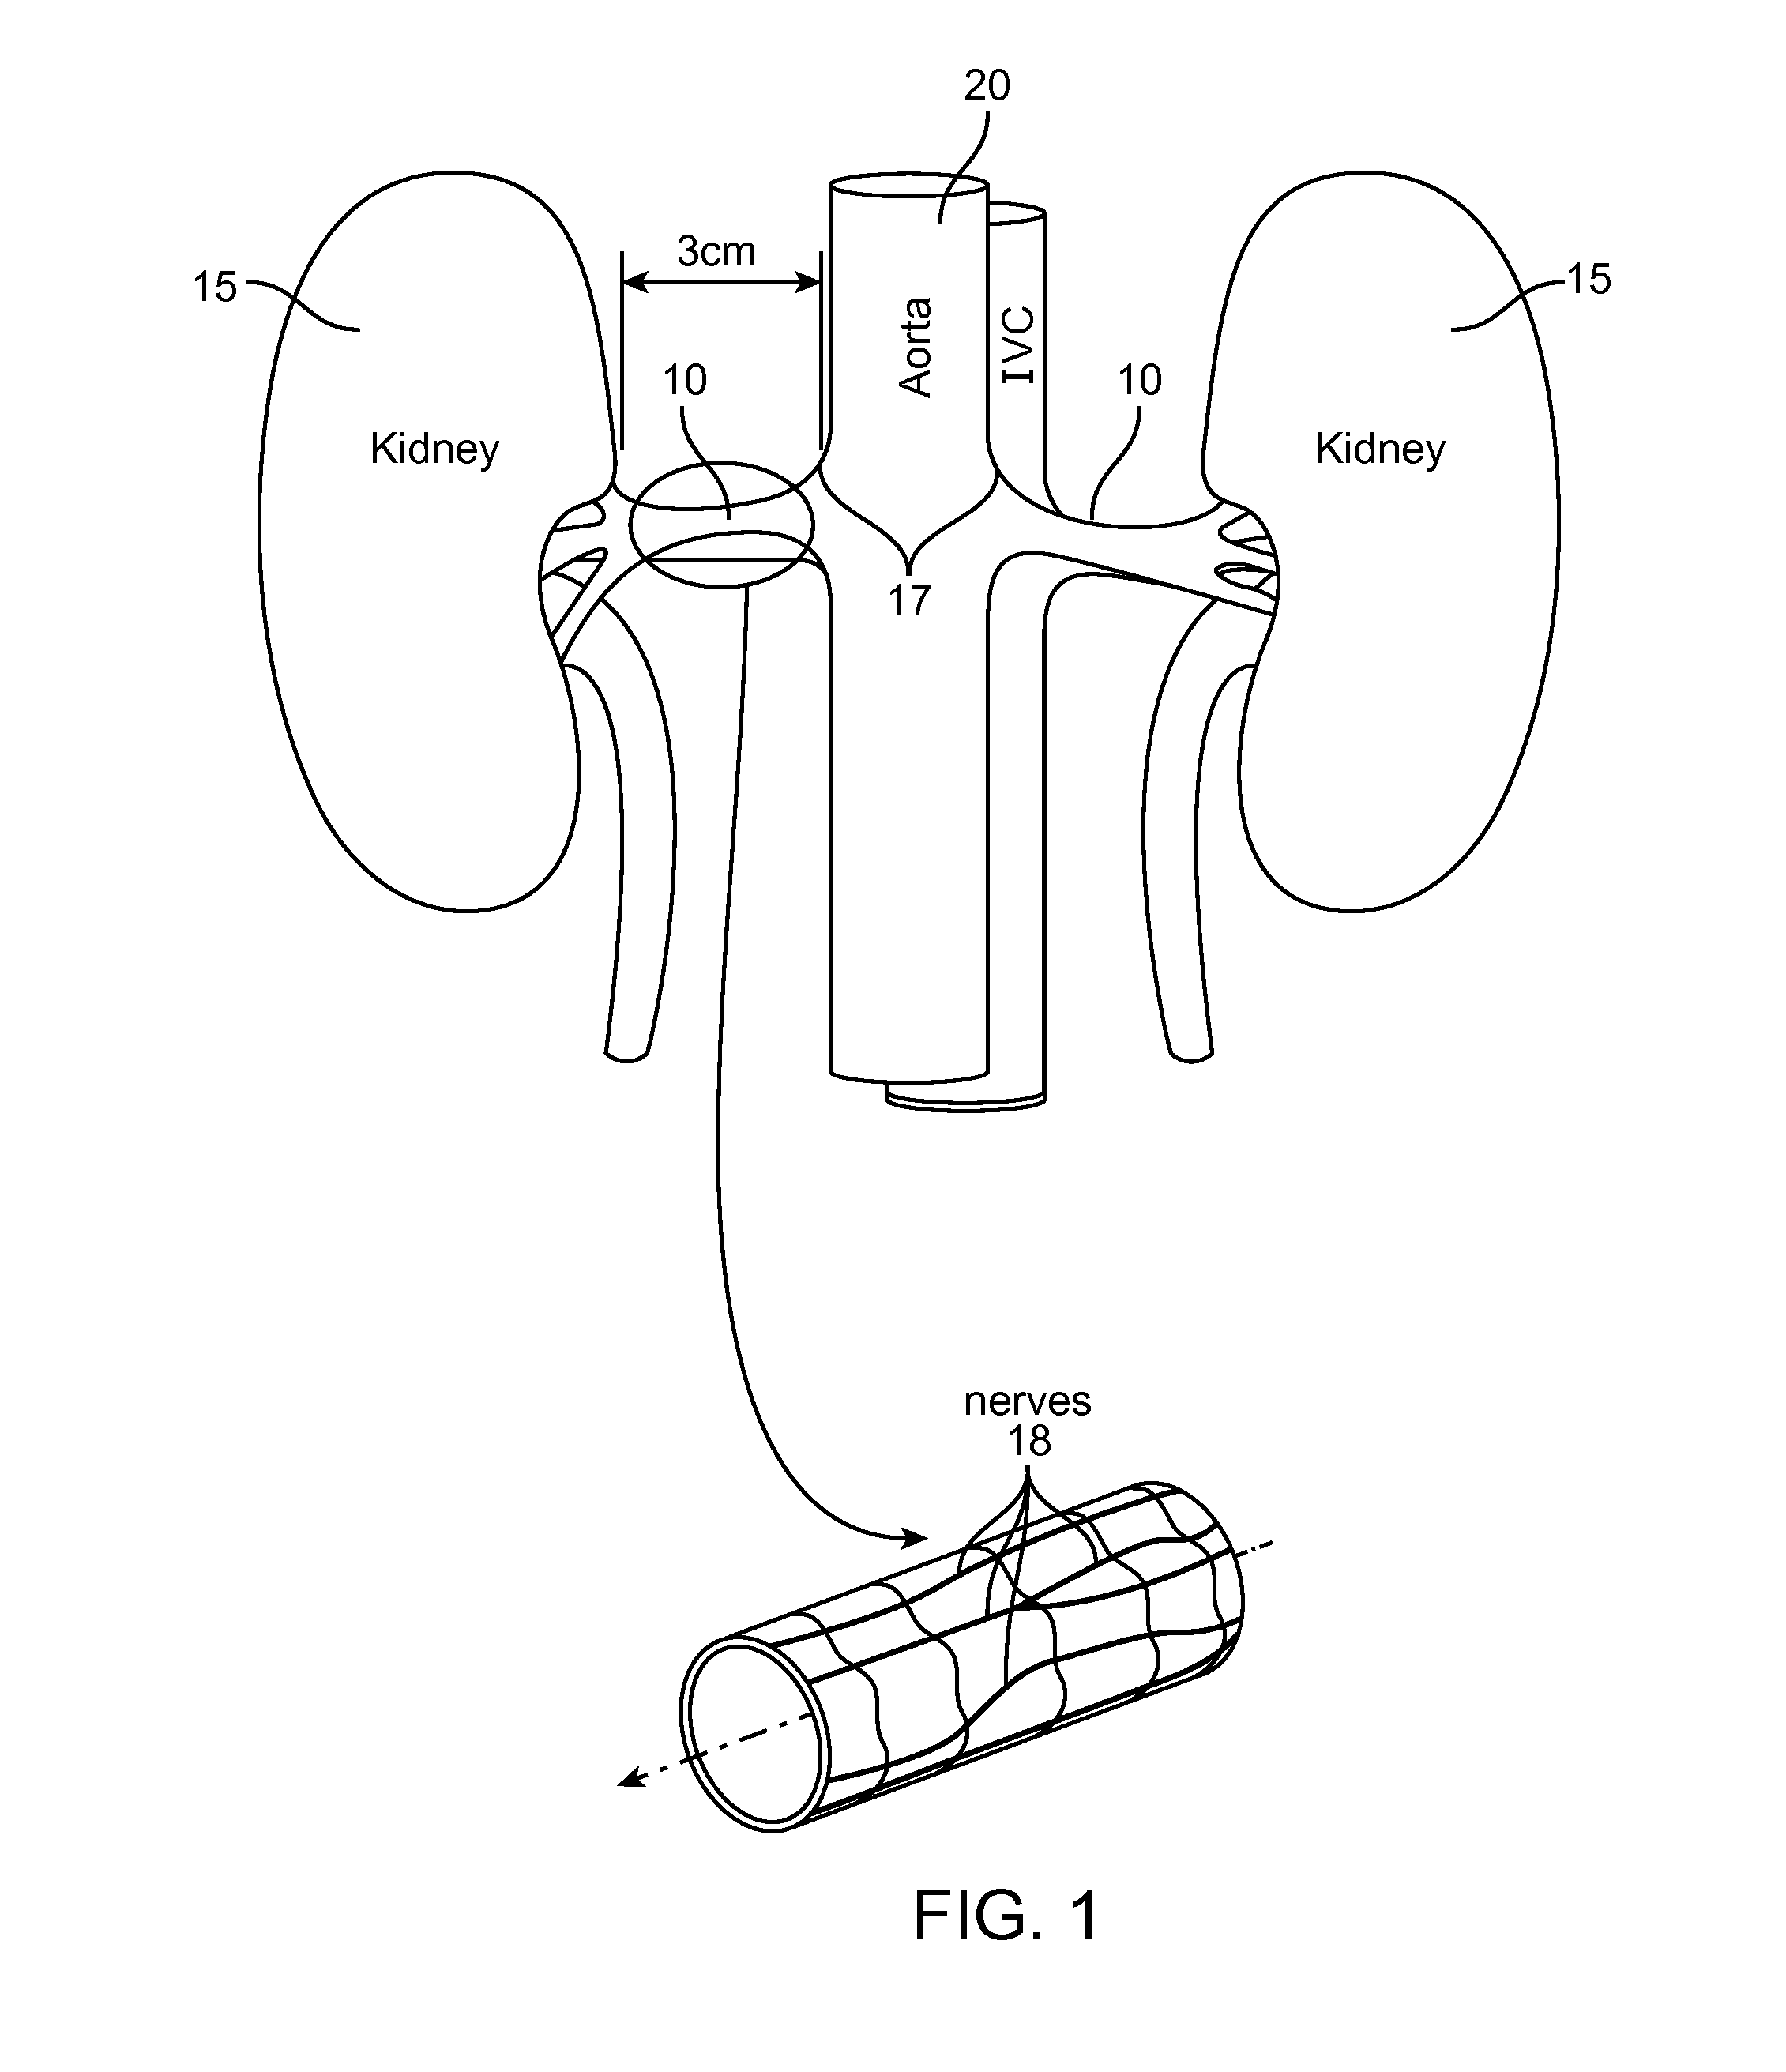 Method and apparatus employing ultrasound energy to remodulate vascular nerves